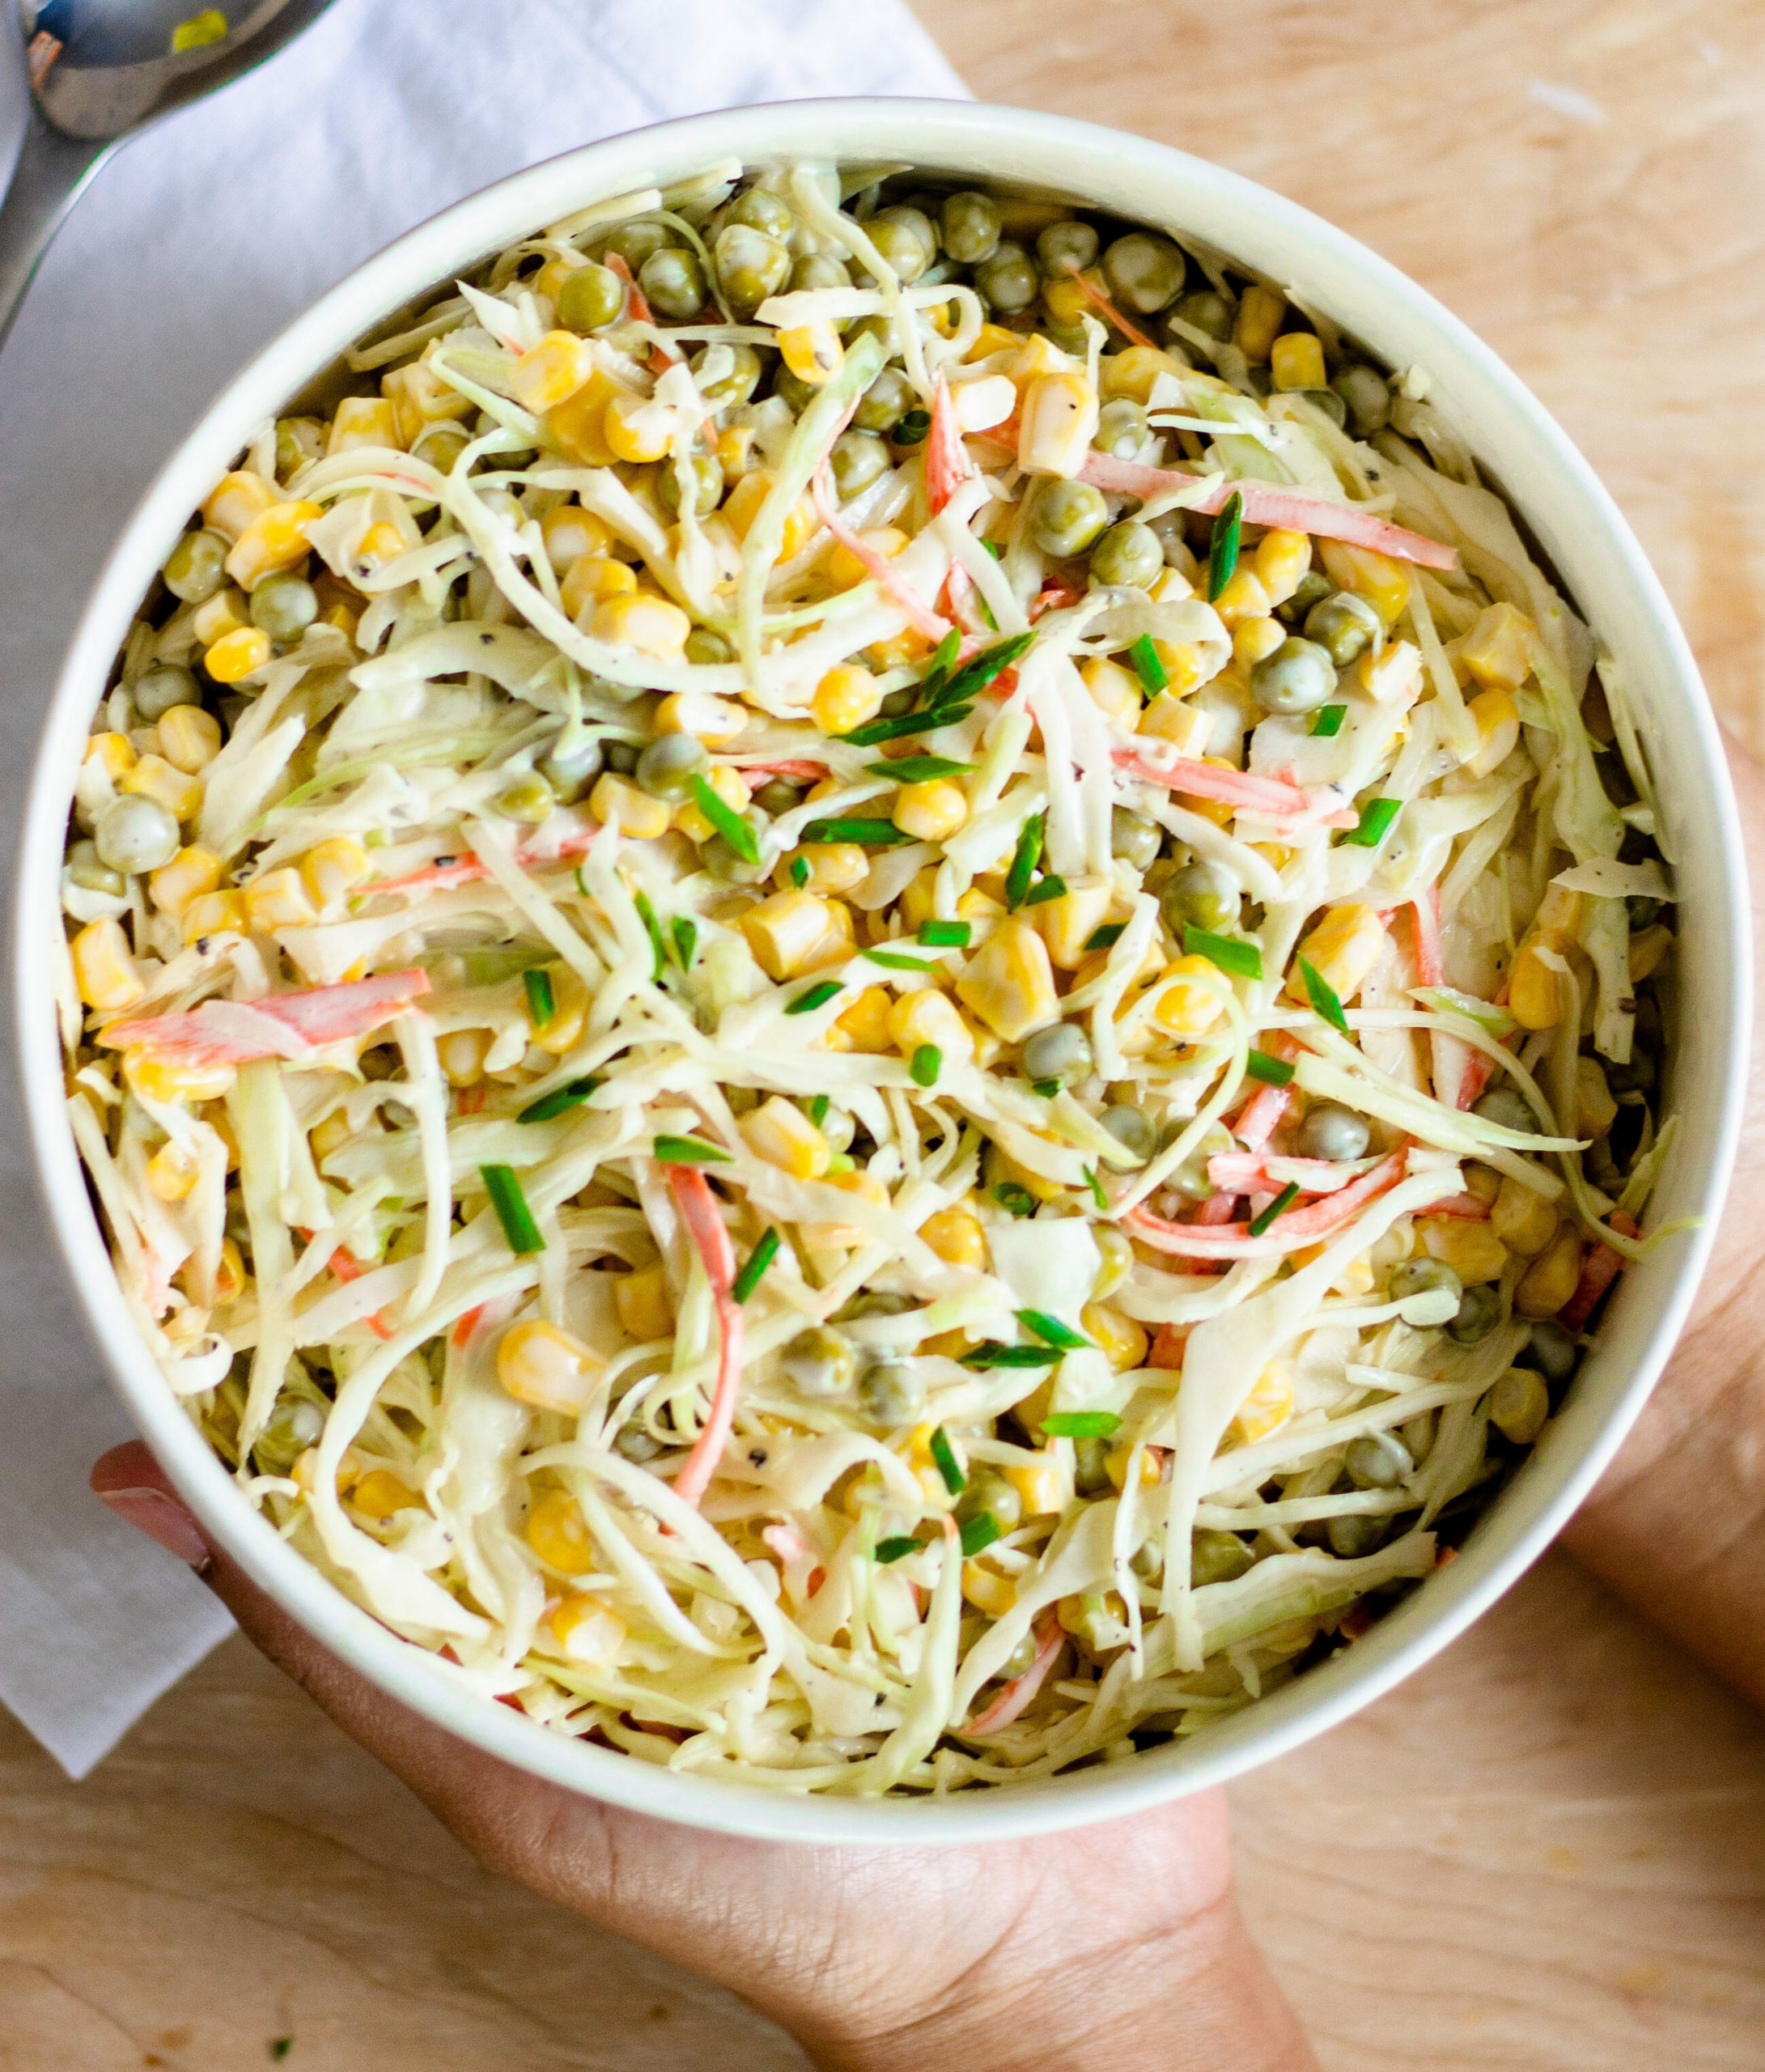 Coleslaw with Corn and Peas